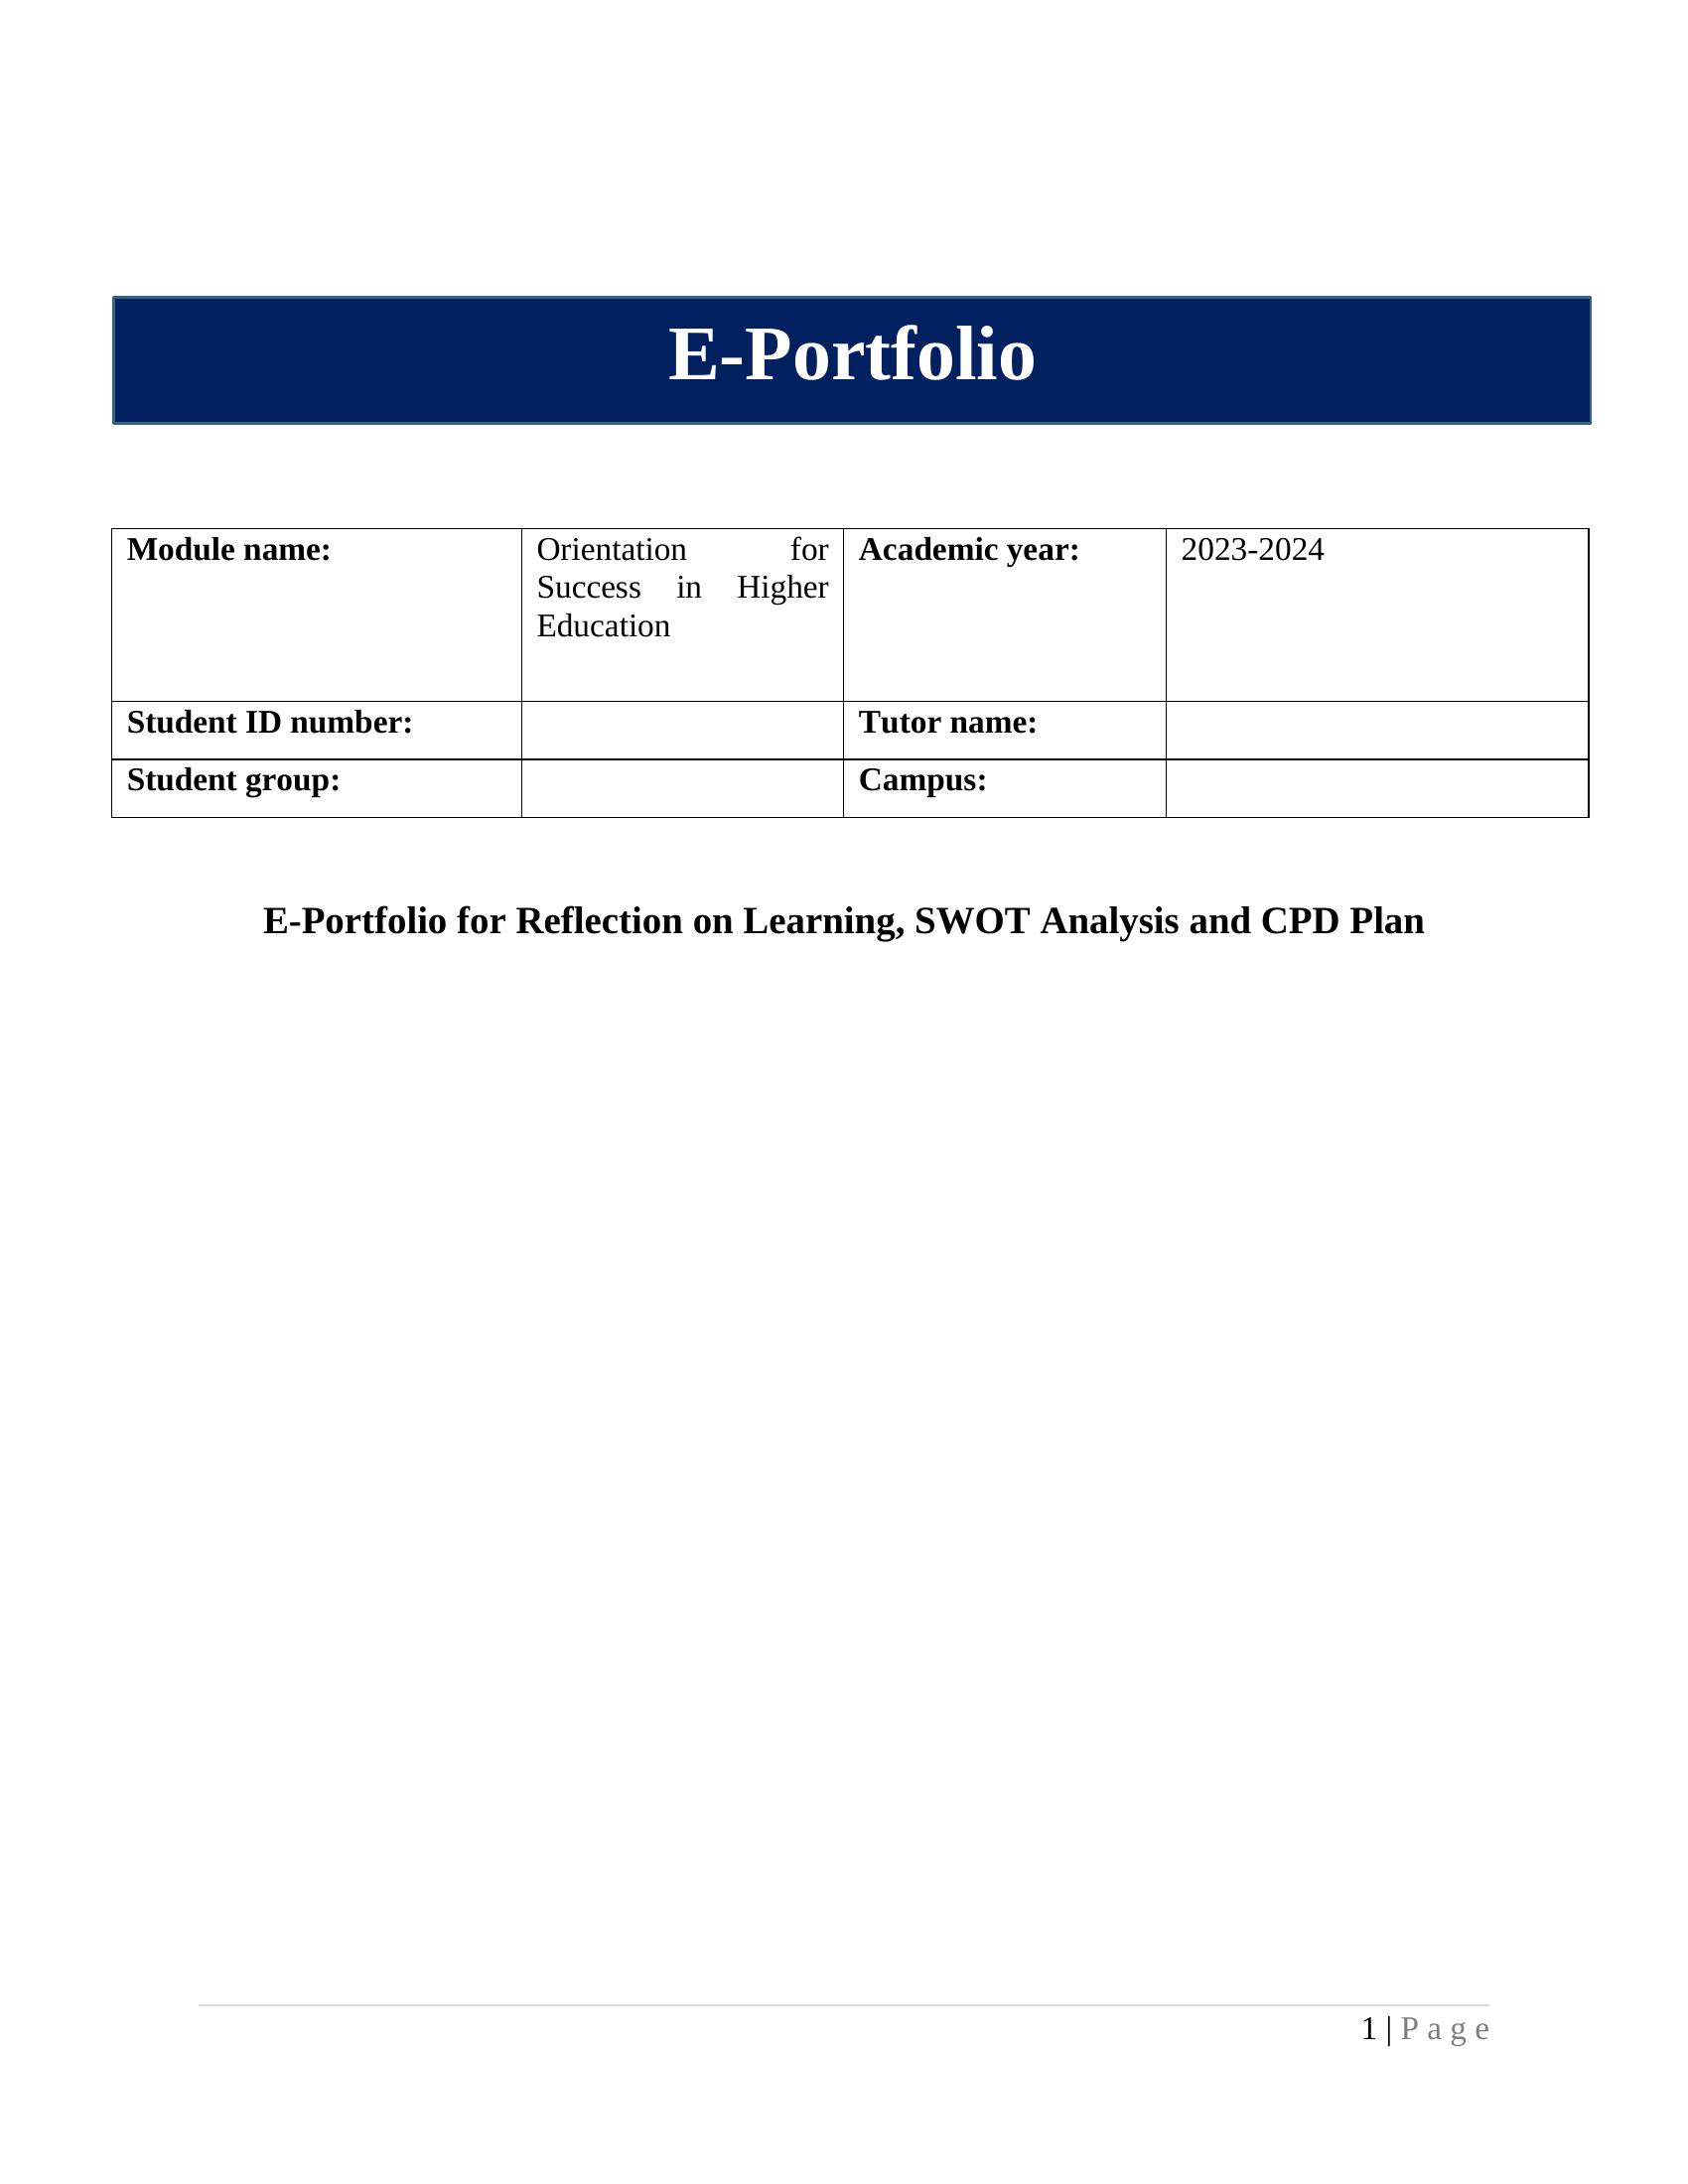 E-Portfolio for Reflection on Learning, SWOT Analysis and CPD Plan- Structure